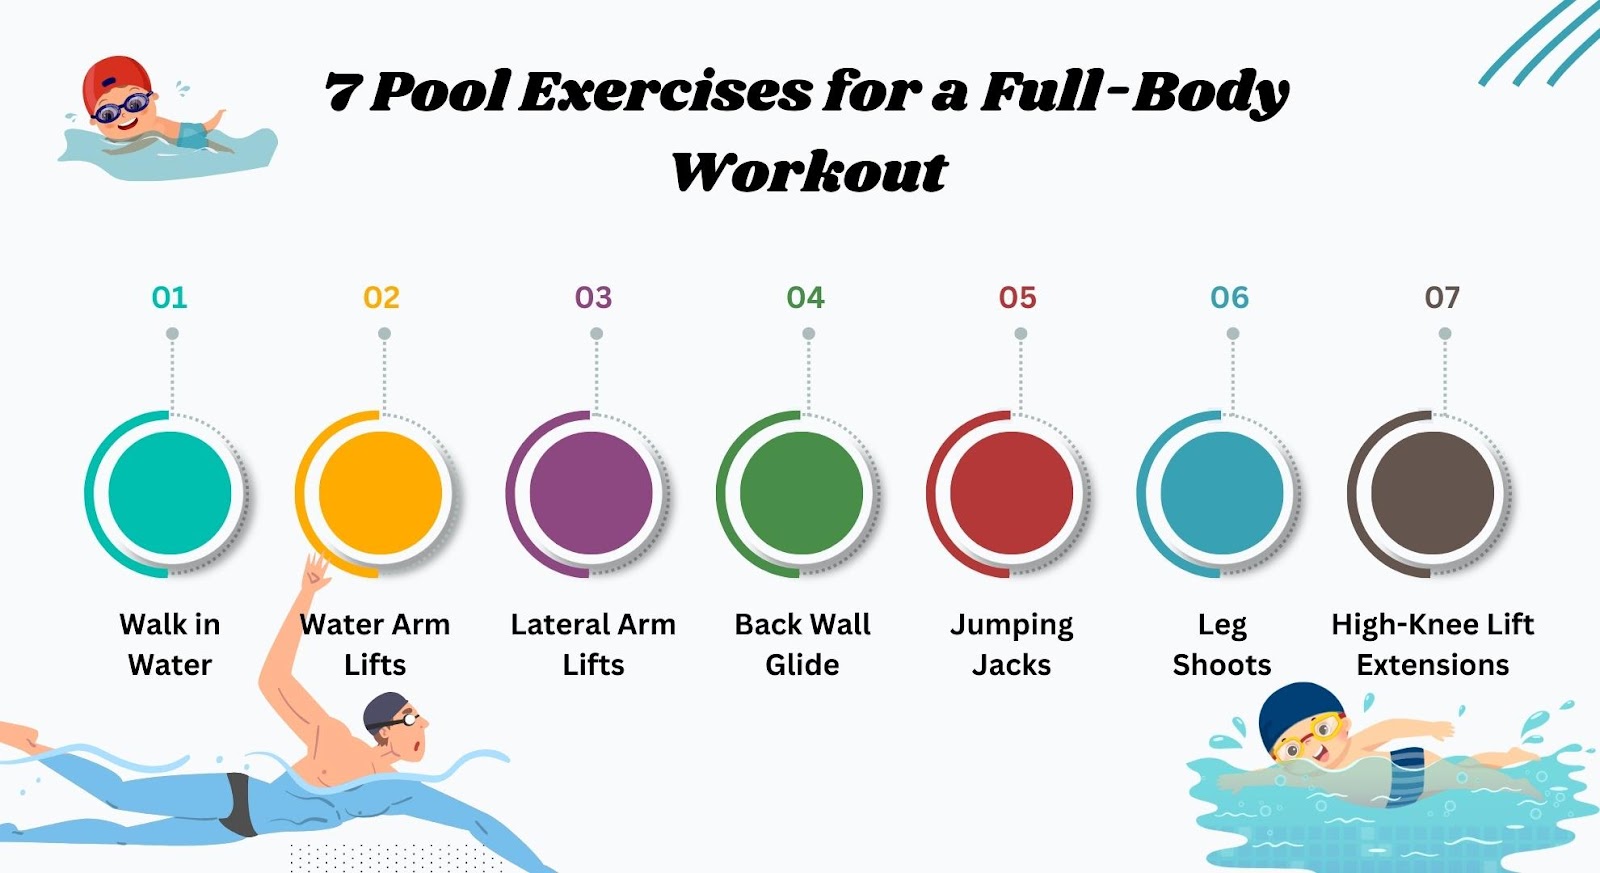 7 Pool Exercises for a Full-Body Workout